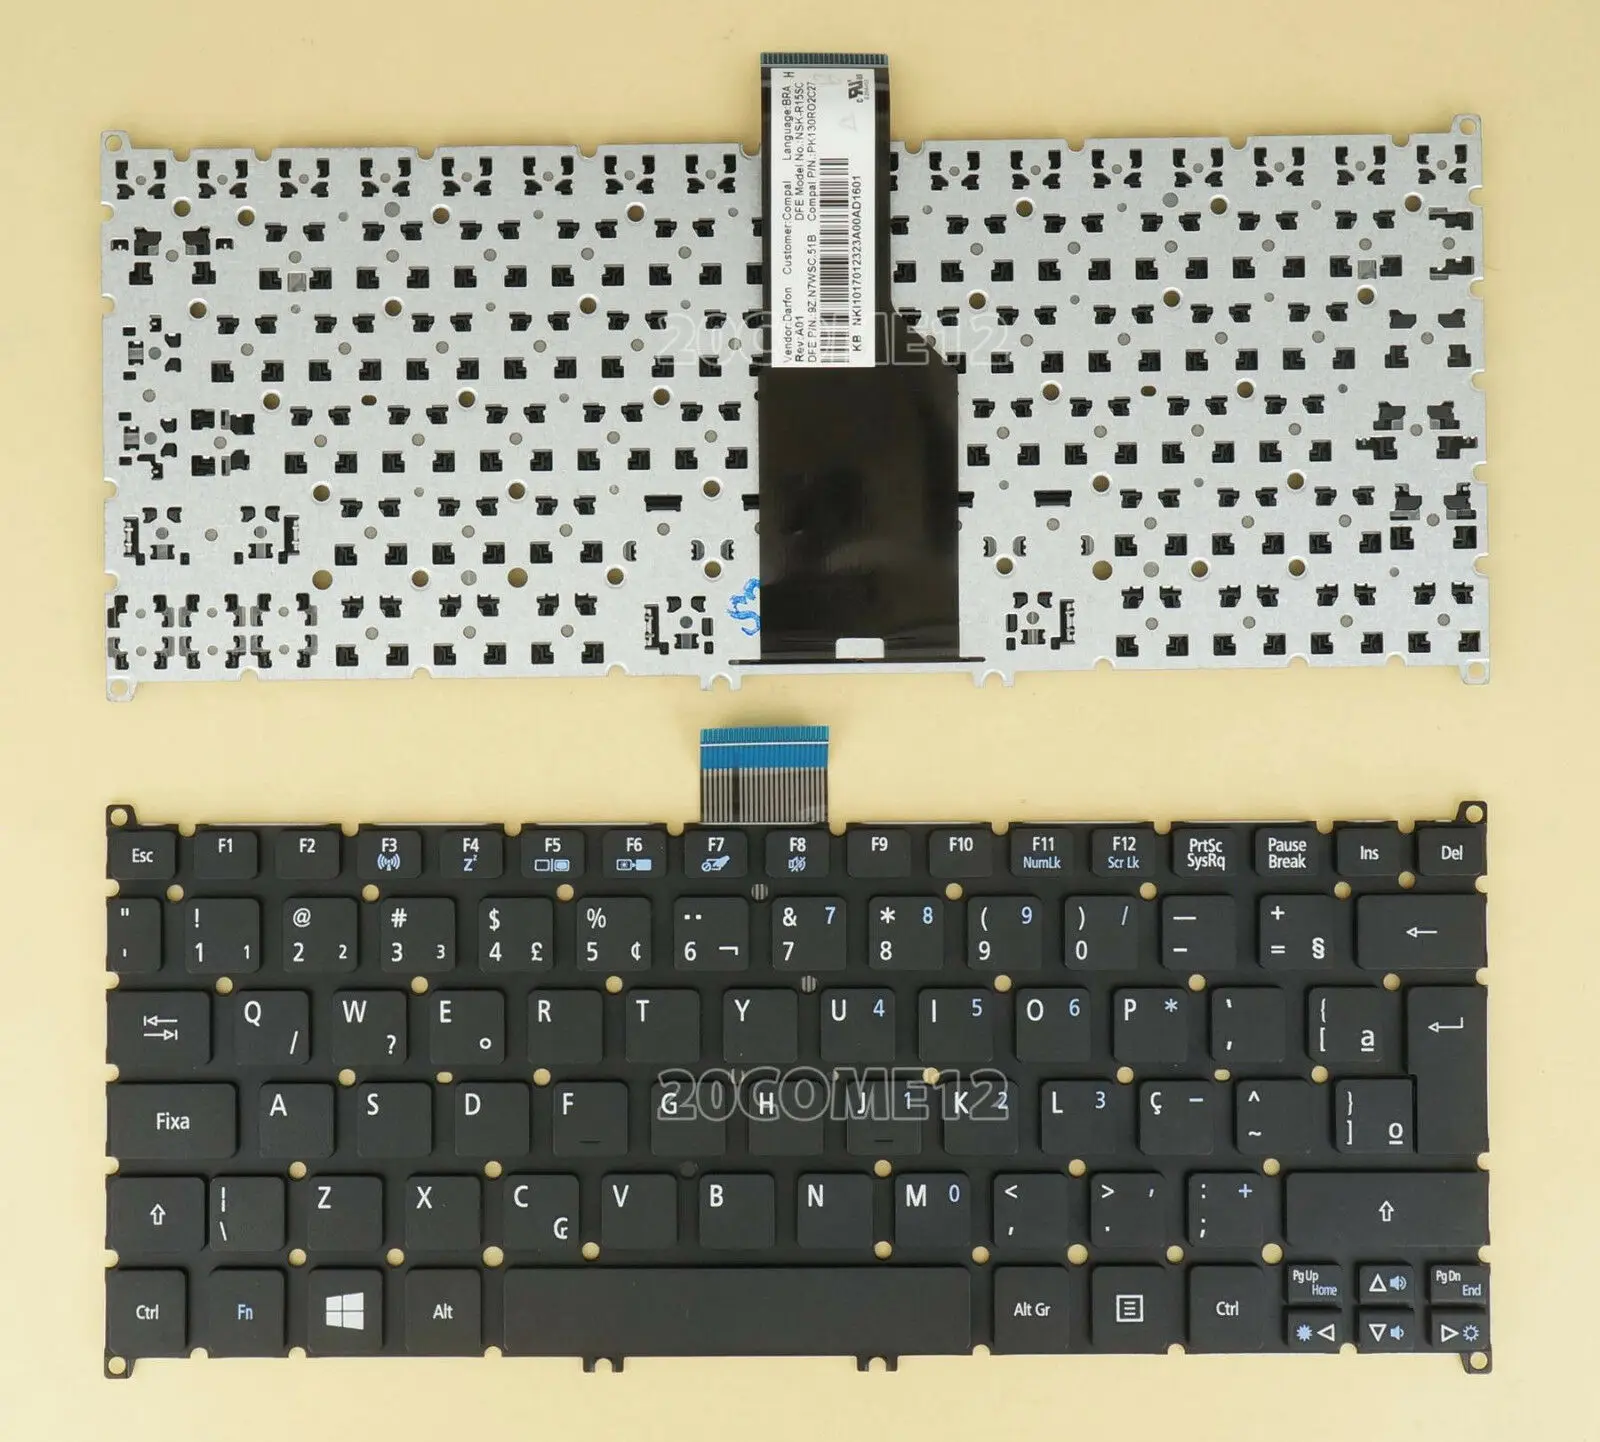 

Brazil Laptop Keyboard For Acer Aspire S3 S3-391 S3-951 S3-371 S5 S5-391 725 756 TravelMate B1 B113 B113-E B113-M BR Layout